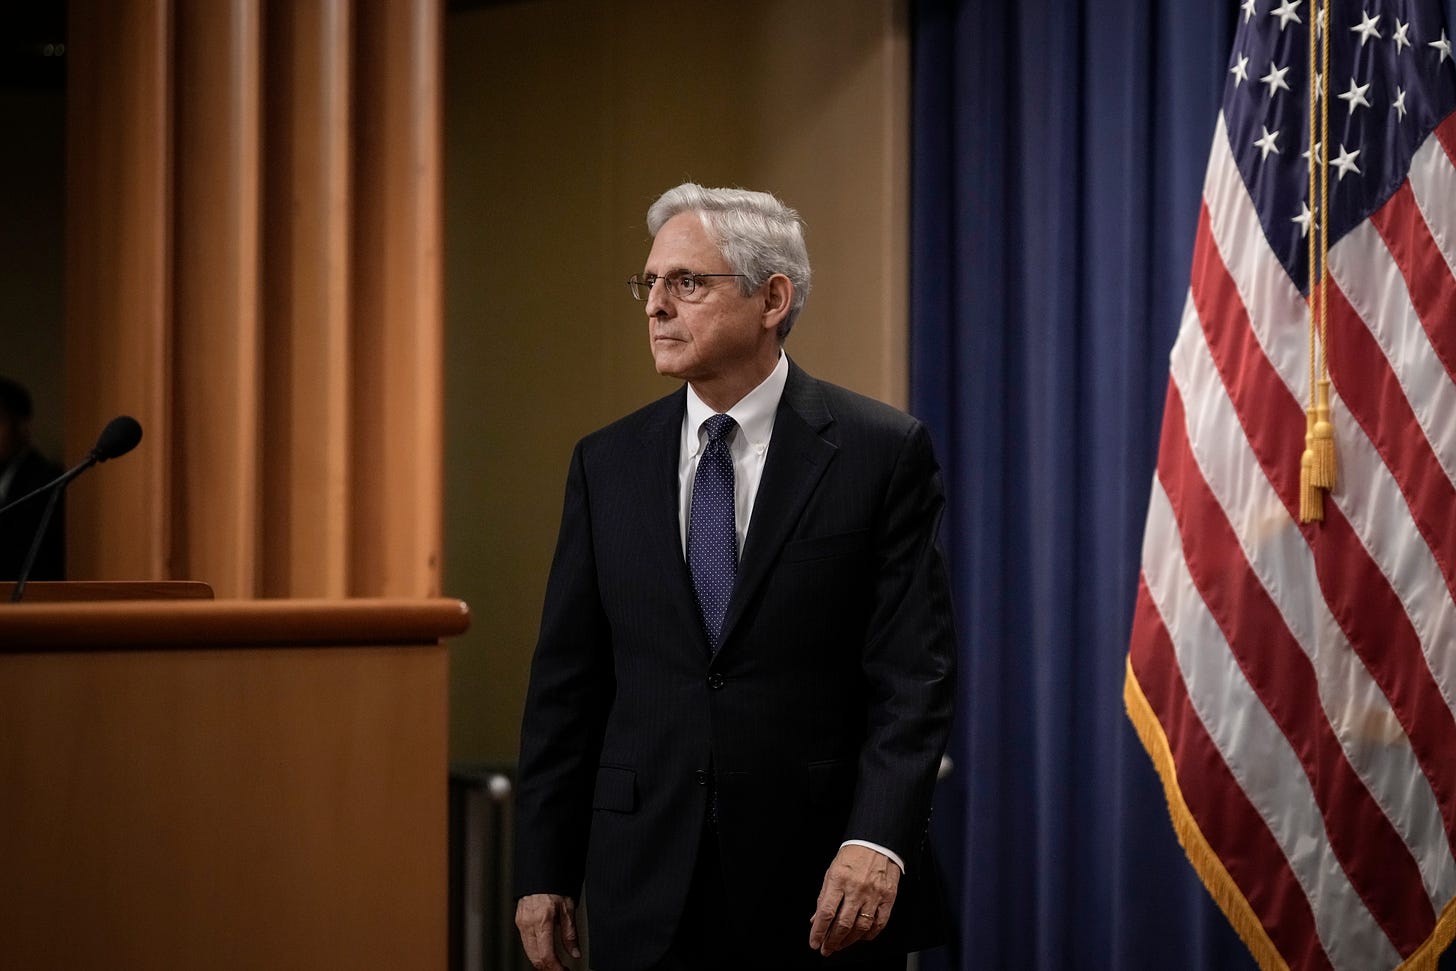 U.S. Attorney General Merrick Garland arrives to deliver a statement at the U.S. Department of Justice August 11, 2022 in Washington, DC. (Photo by Drew Angerer/Getty Images)